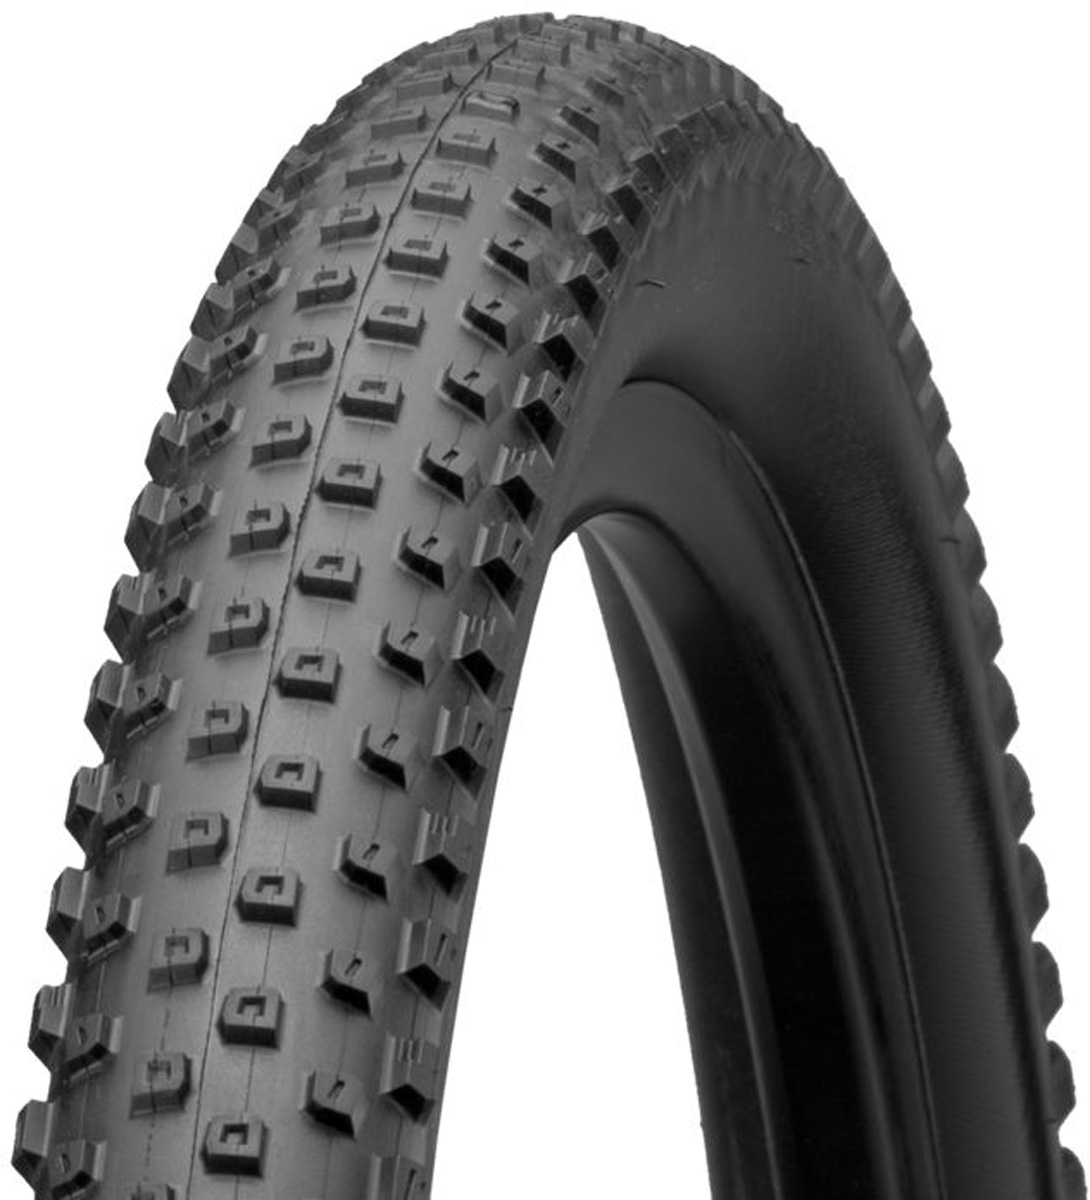 Details about   Bontrager XR2 Team Issue Tubeless Ready MTB Mountain Bike Tire 29 x 2.35 